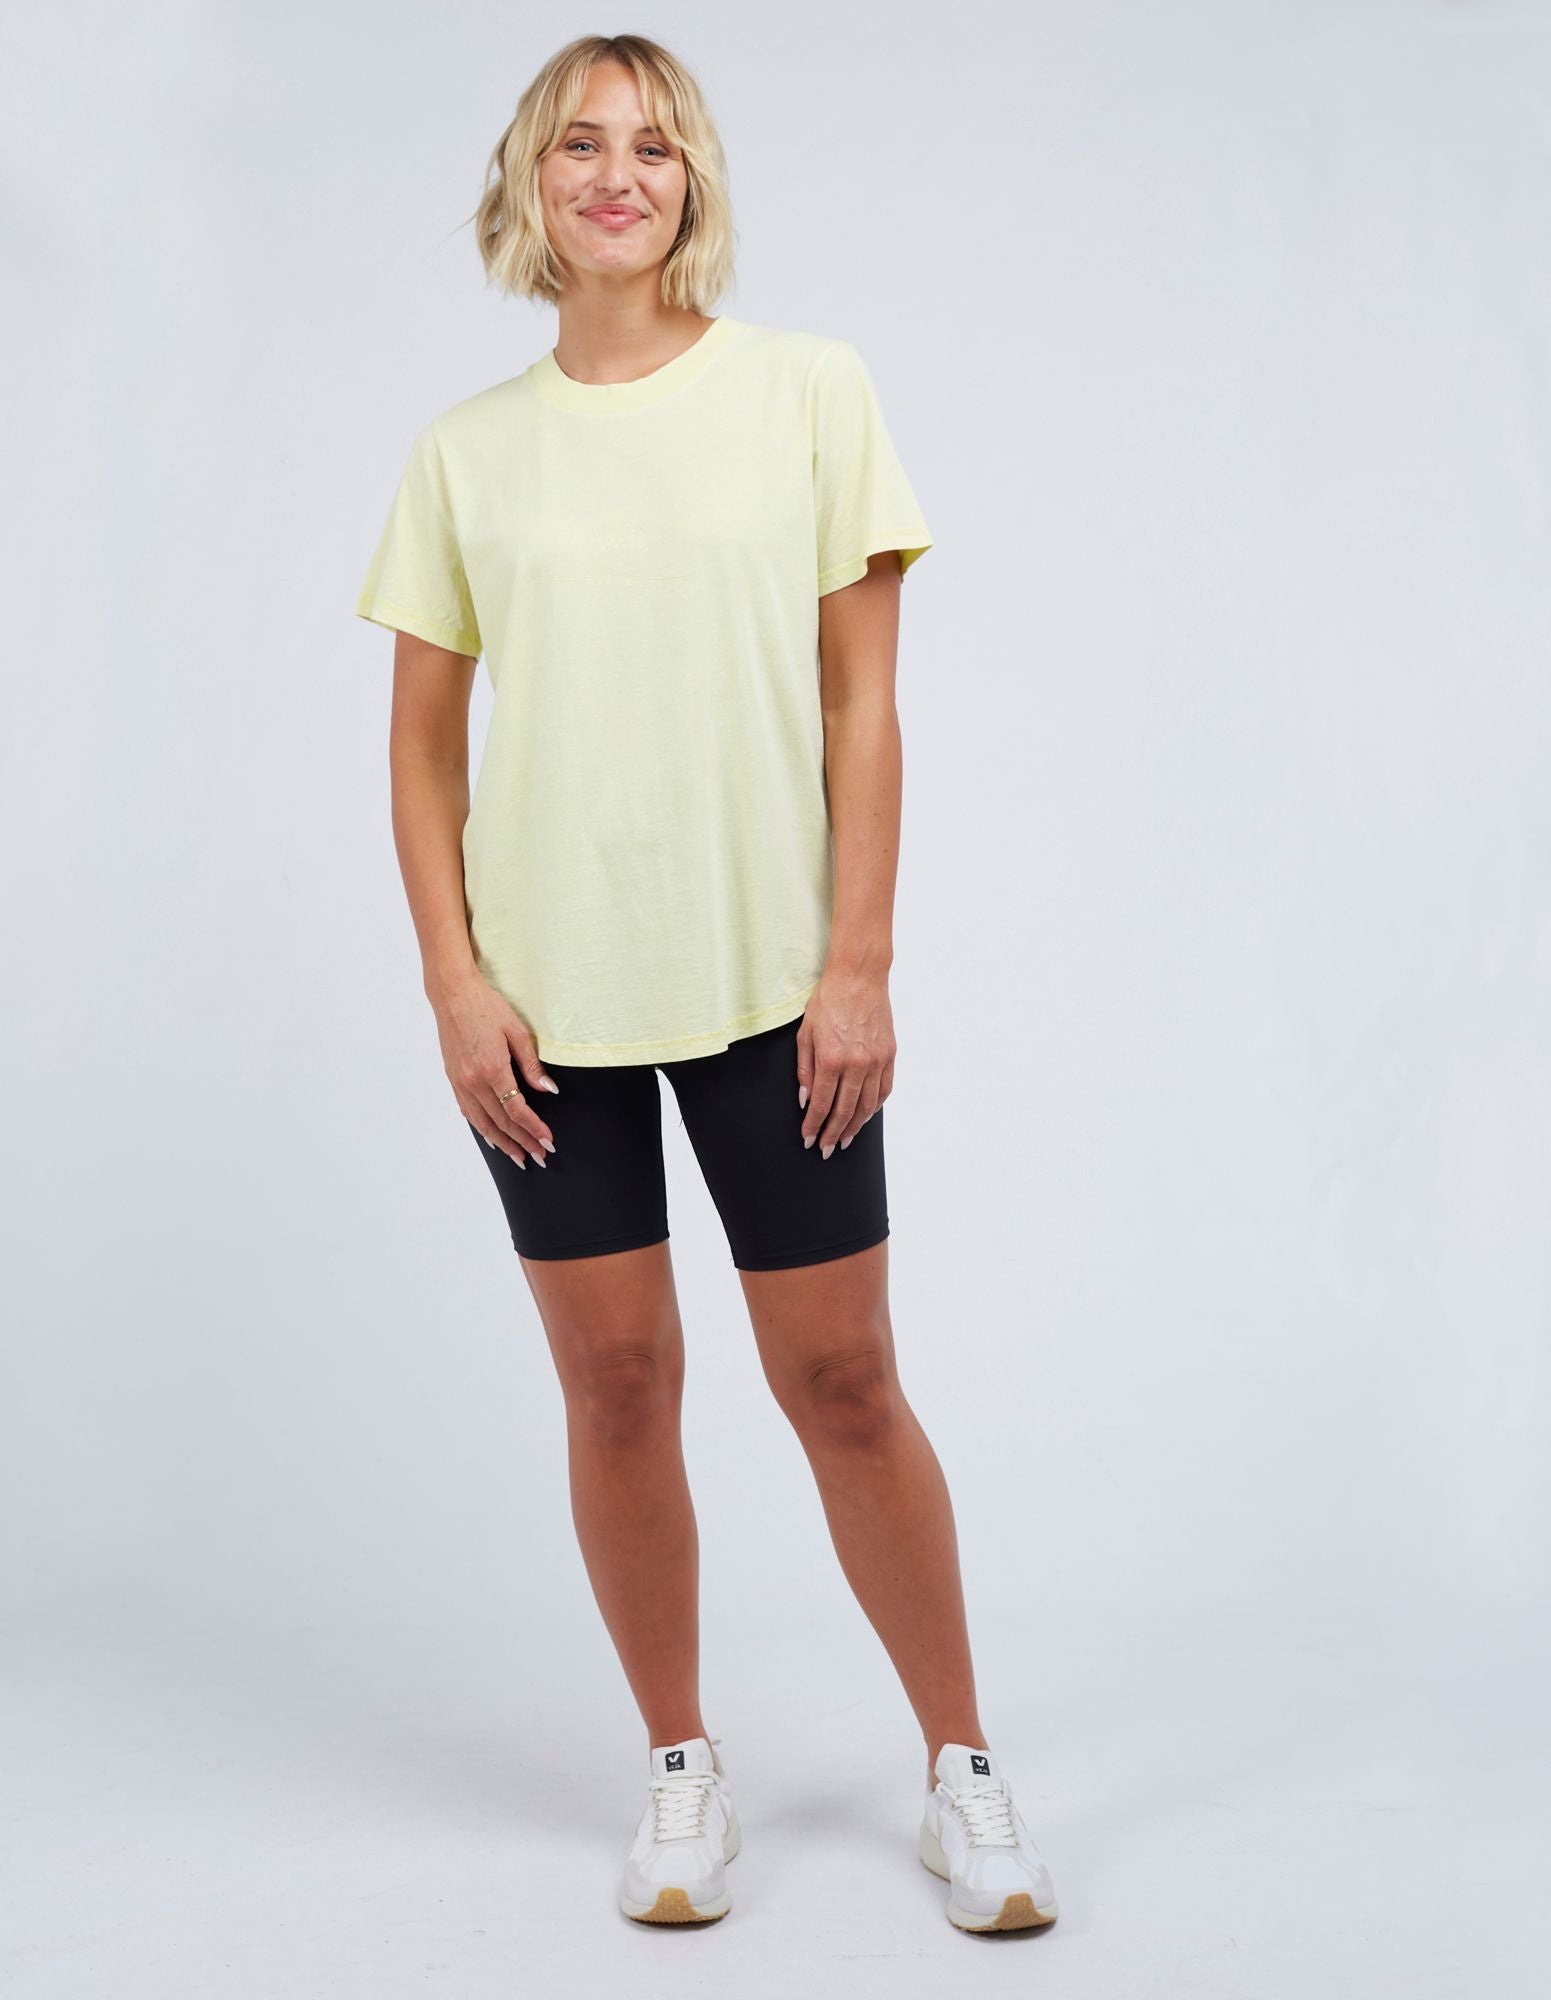 Fly Tee - Limey Yellow - Foxwood - FUDGE Gifts Home Lifestyle